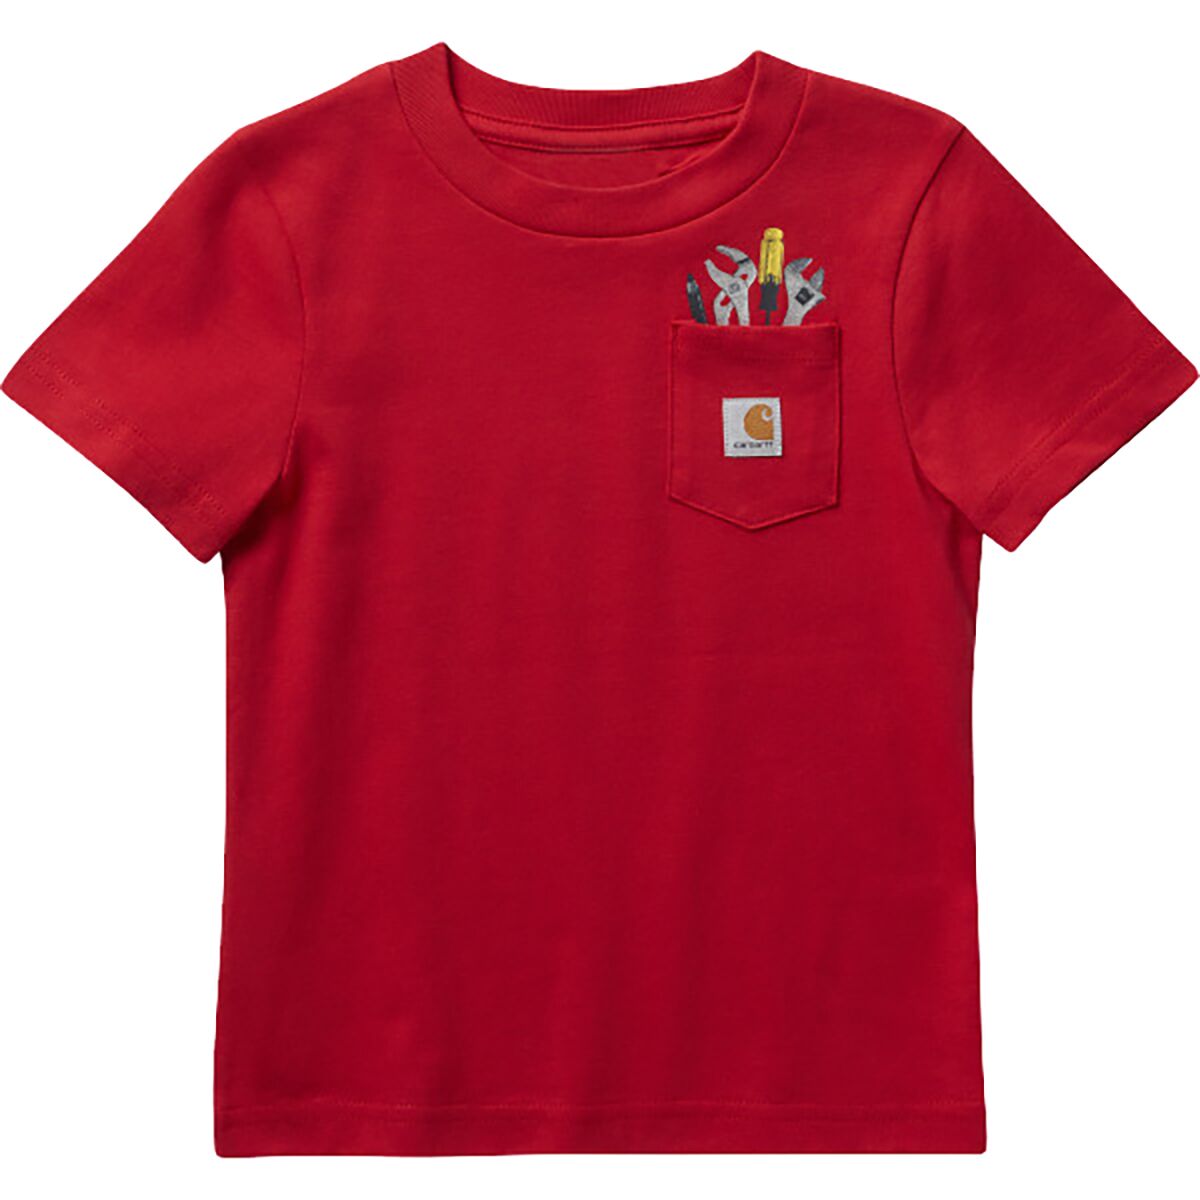 Carhartt Pocket Tool Short-Sleeve Graphic T-Shirt - Toddlers'